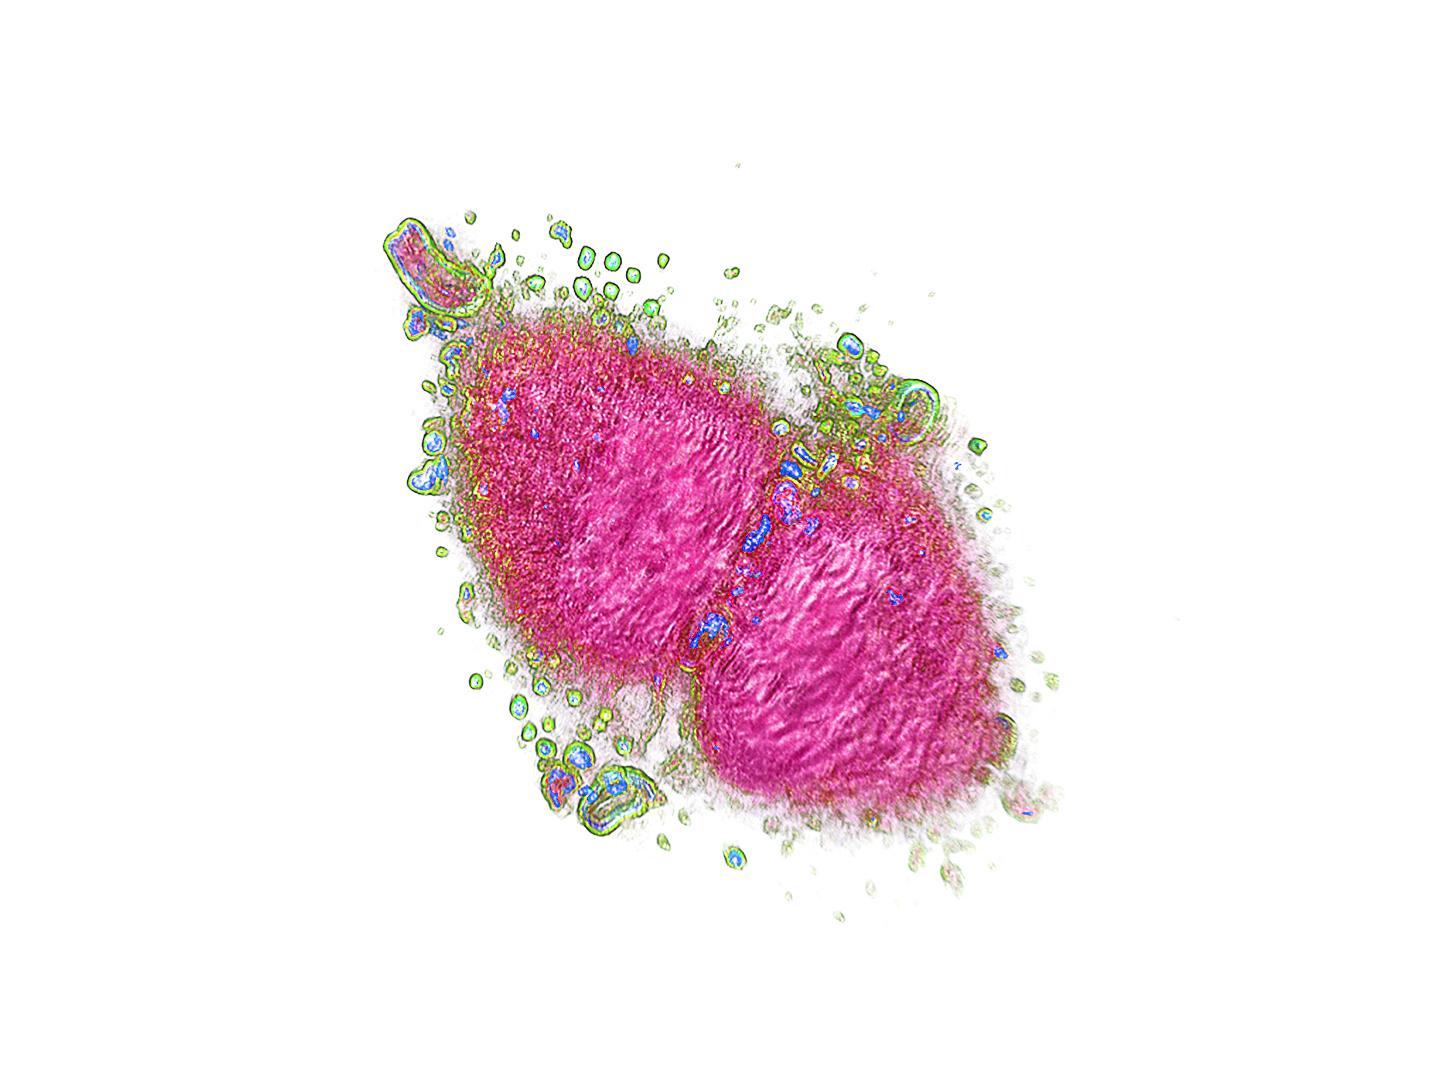 Cancer Cell with 3-D Microscope Explorer